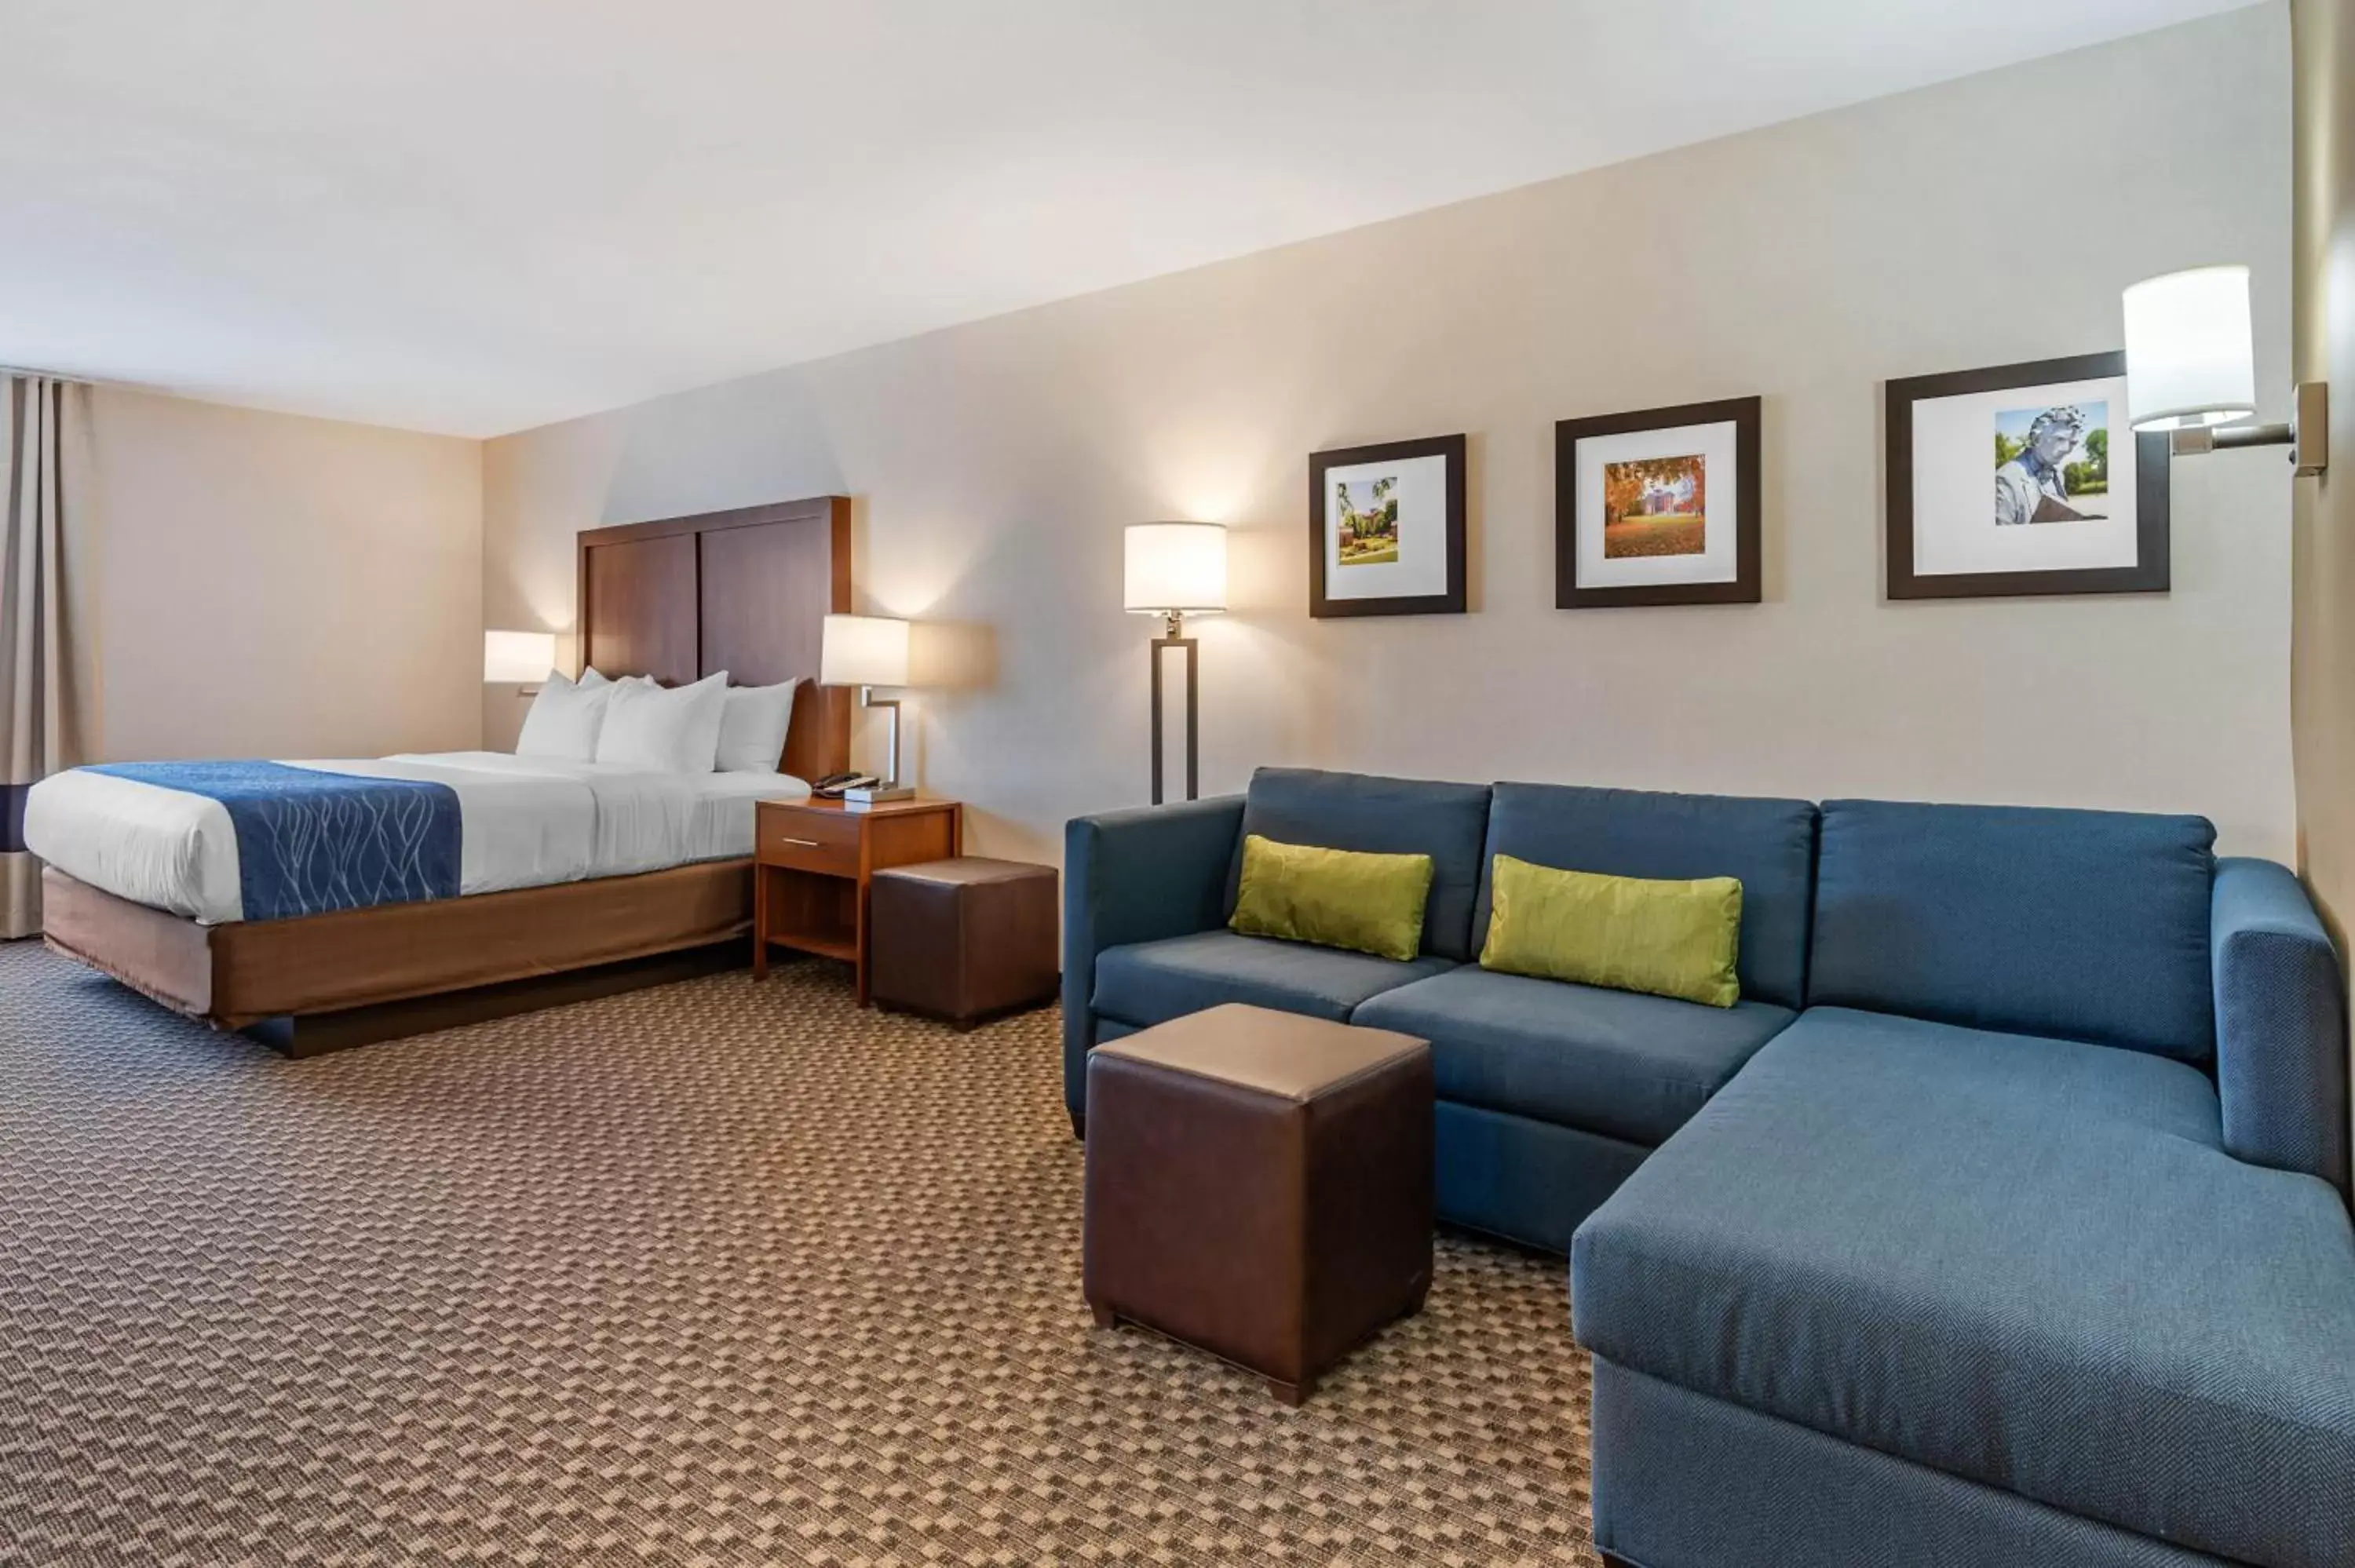 King Suite with Sofa Bed - Non-Smoking in Comfort Inn & Suites near Route 66 Award Winning Gold Hotel 2021